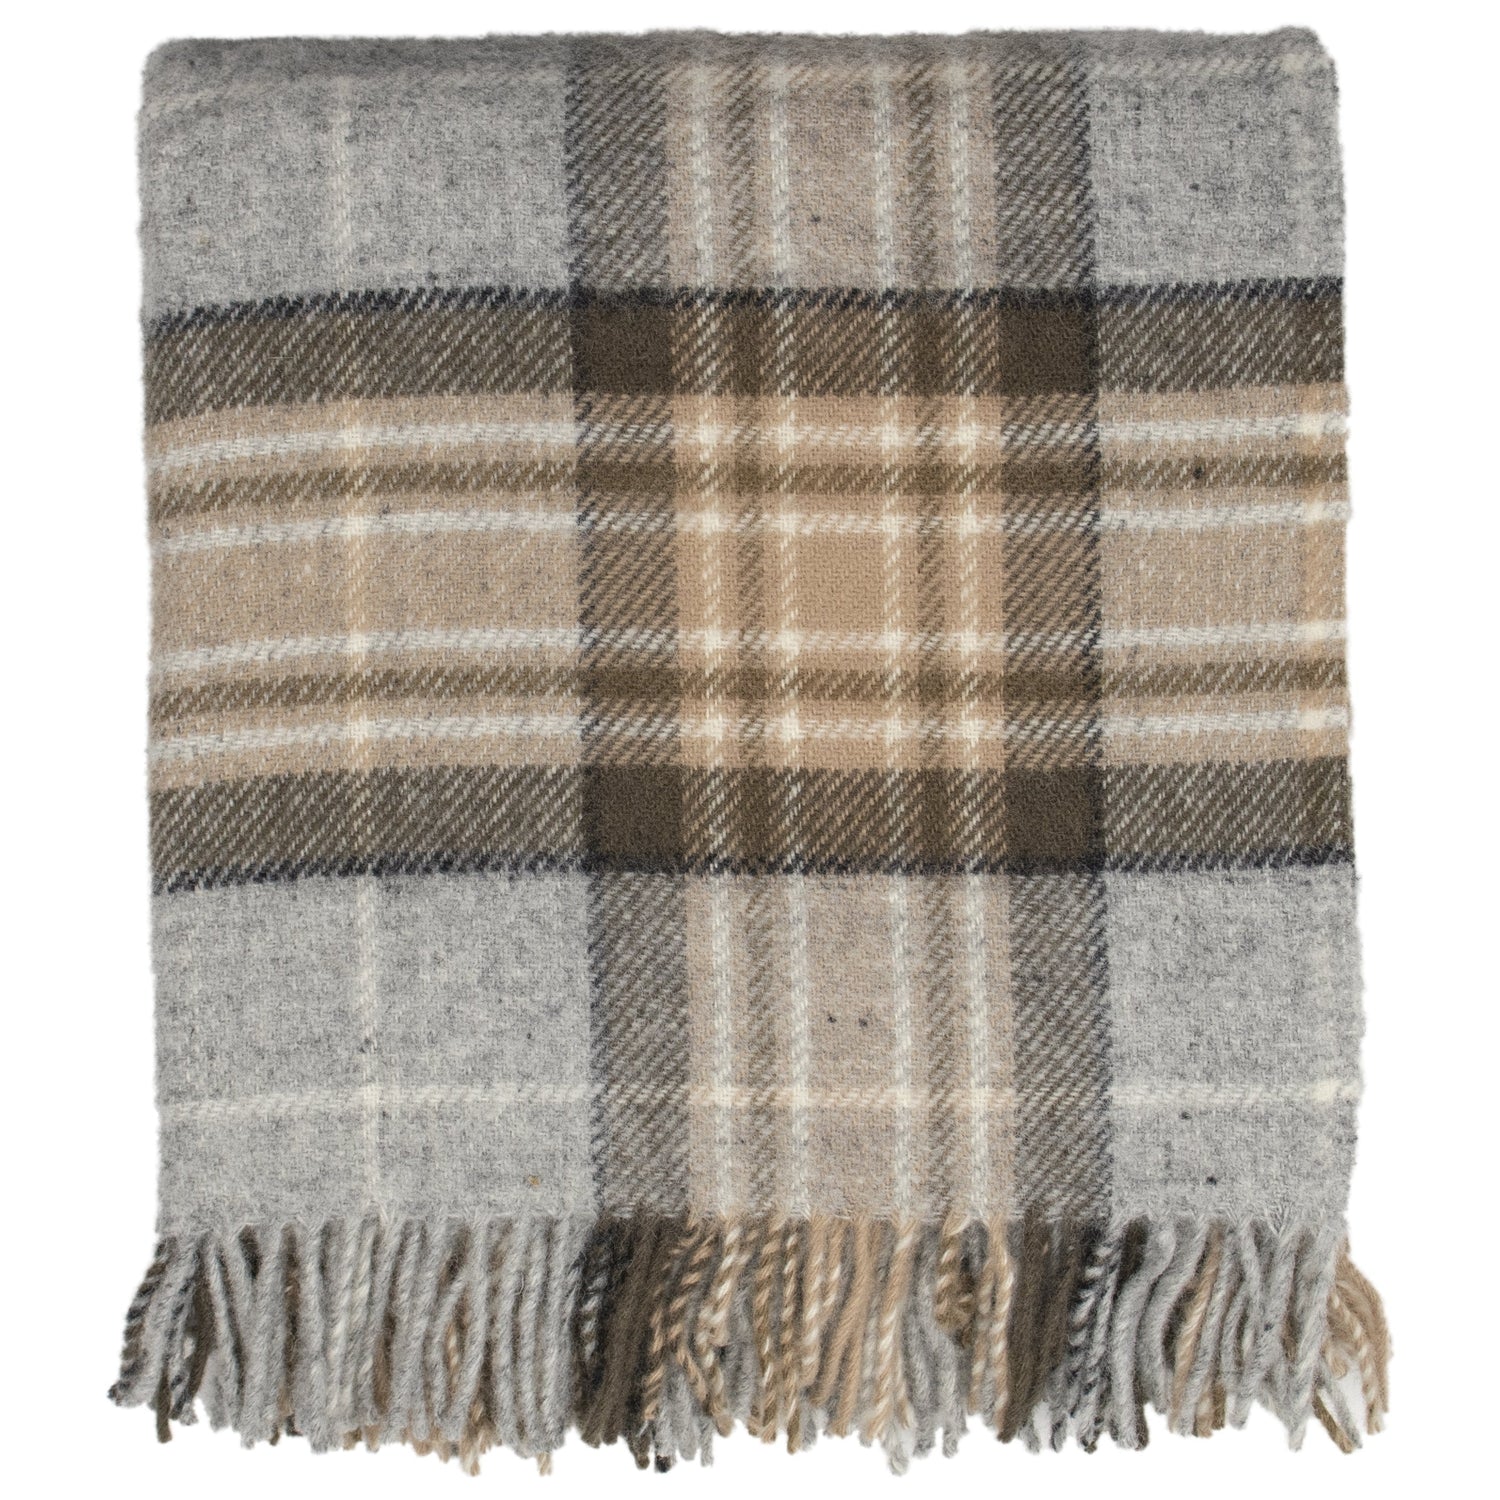 Prince of Scots Highland Tweed Pure New Wool Fluffy Throw ~ McKellar Tan Plaid ~-Throws and Blankets-Prince of Scots-00810032750251-K4050018-02-Prince of Scots